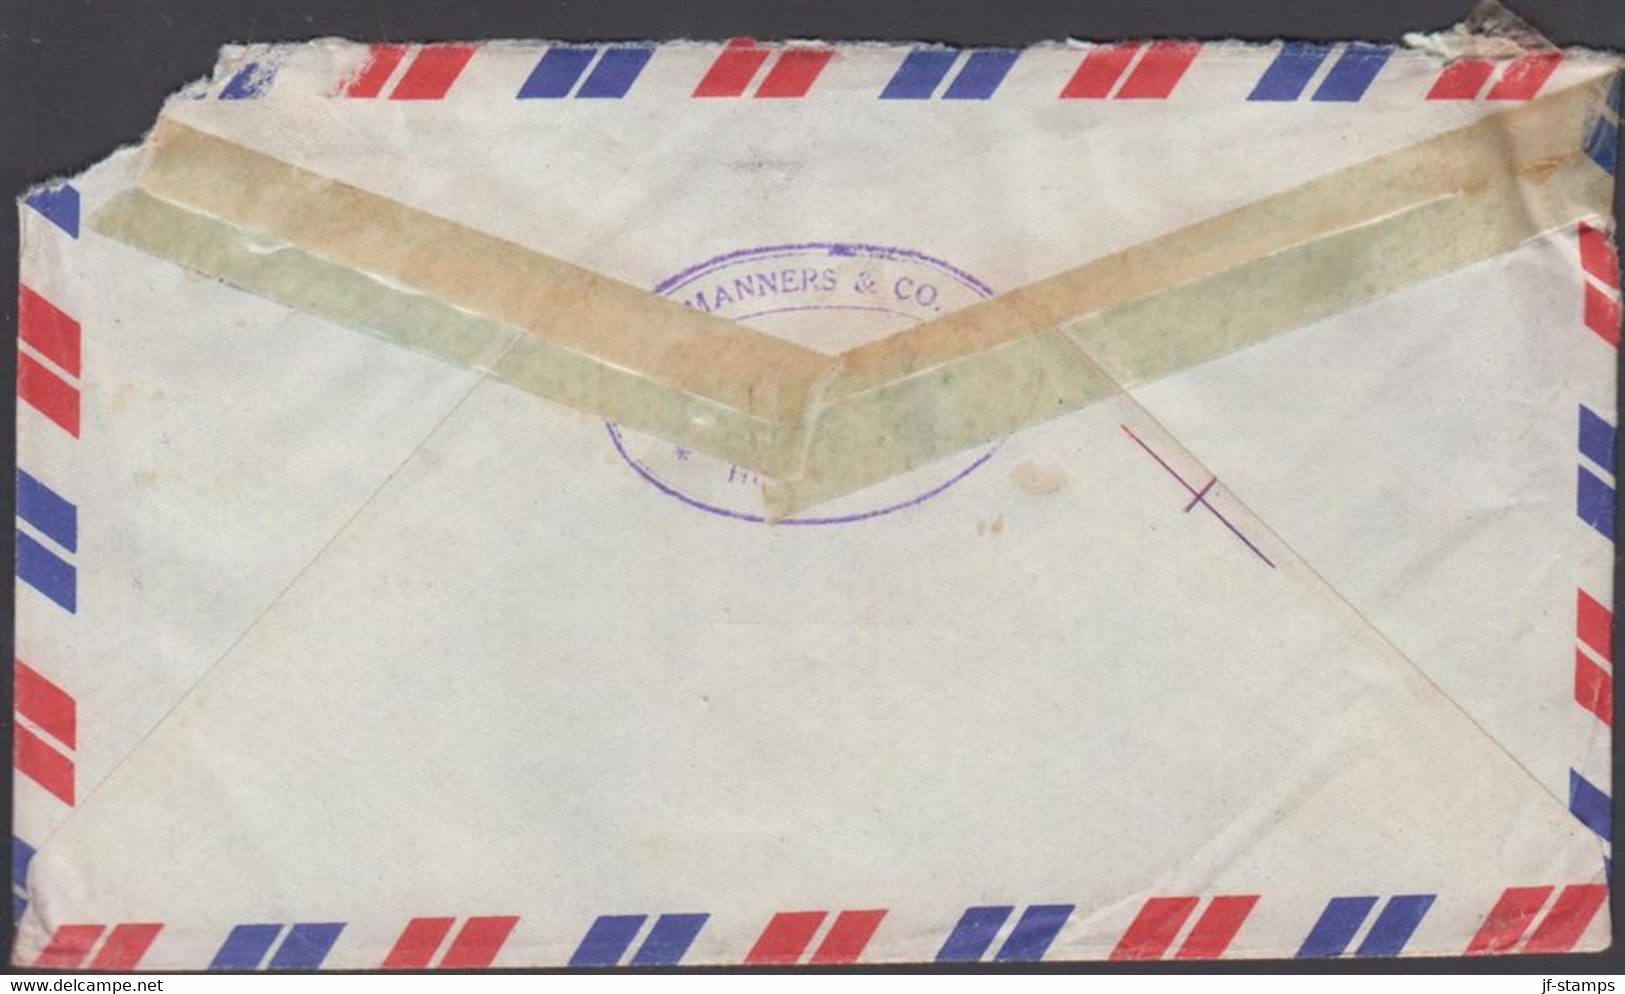 1950. HONGKONG. GEORG VI. 2 Ex ONE DOLLAR + 2 Ex 50 C On AIR MAIL Cover To Denmark. Cancell... (Michel  156+) - JF427069 - Briefe U. Dokumente